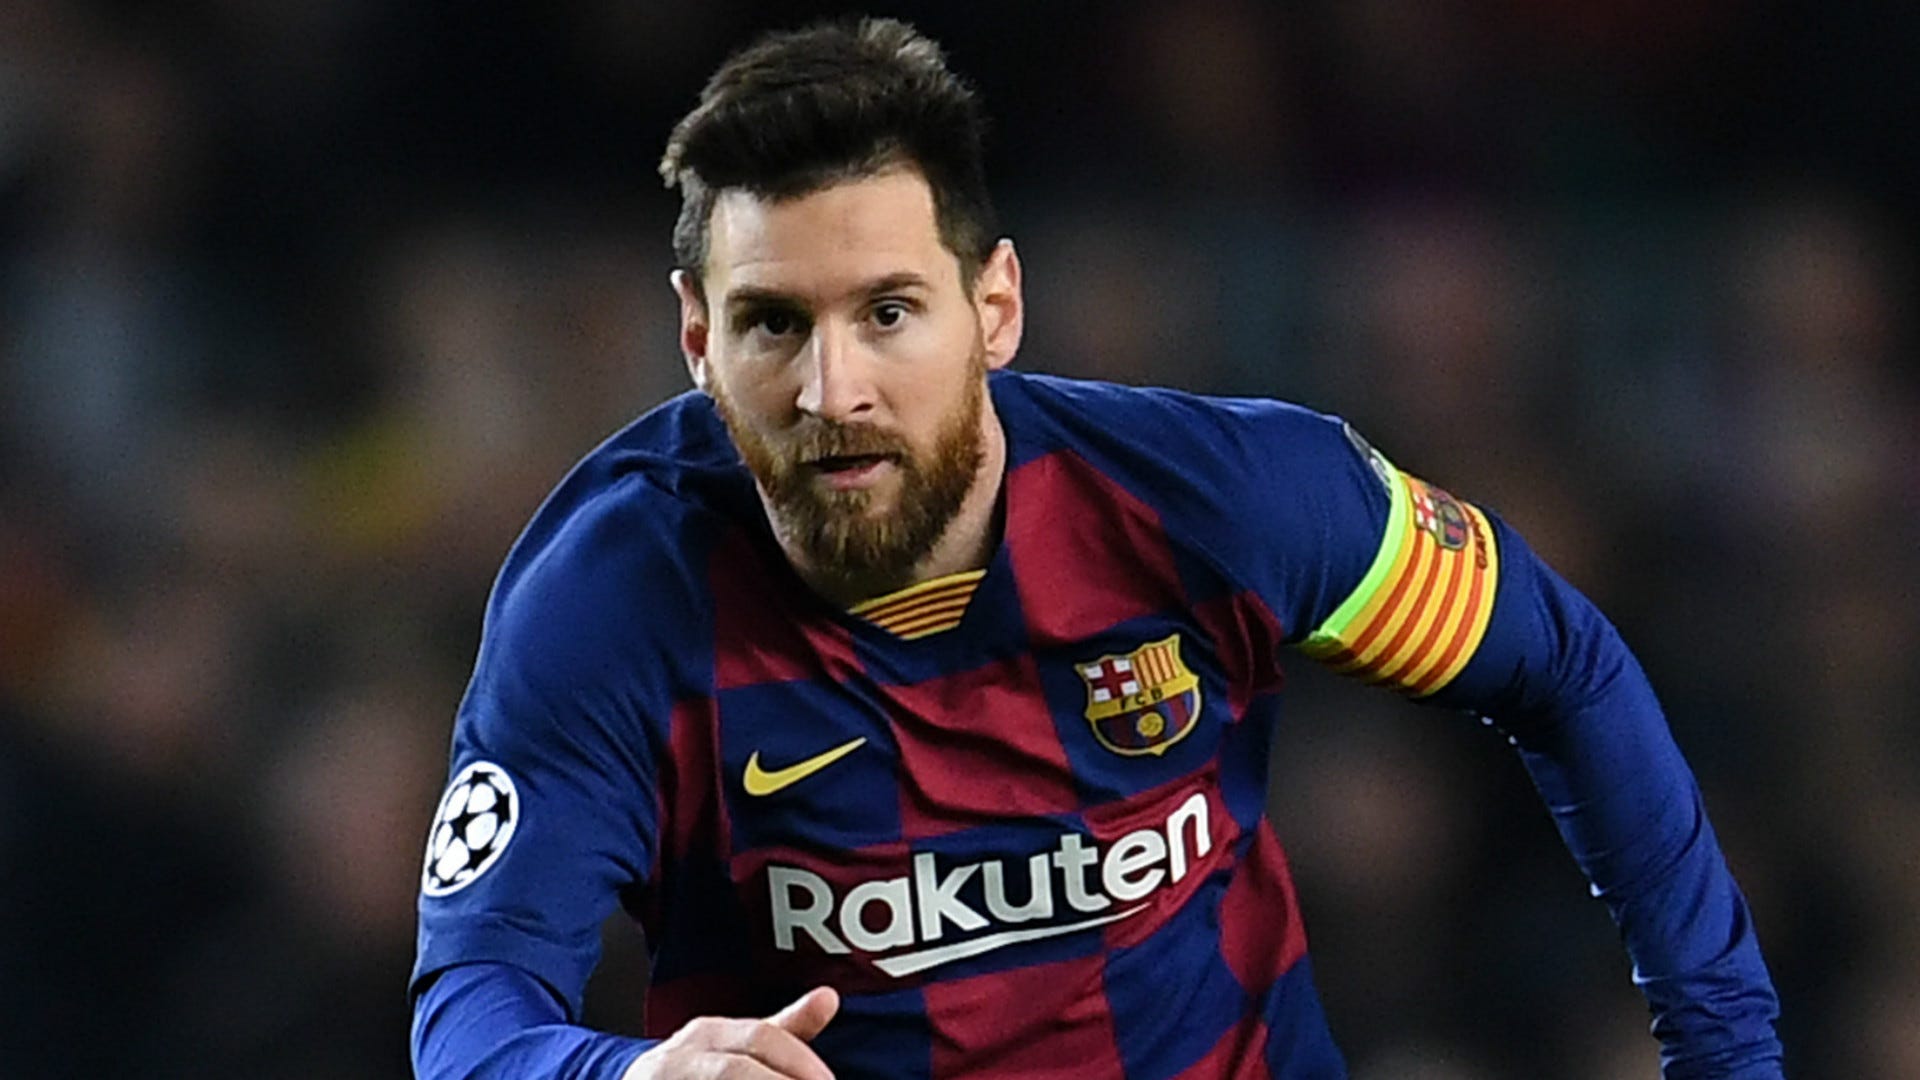 What are Lionel Messi's diet, workout and training secrets?